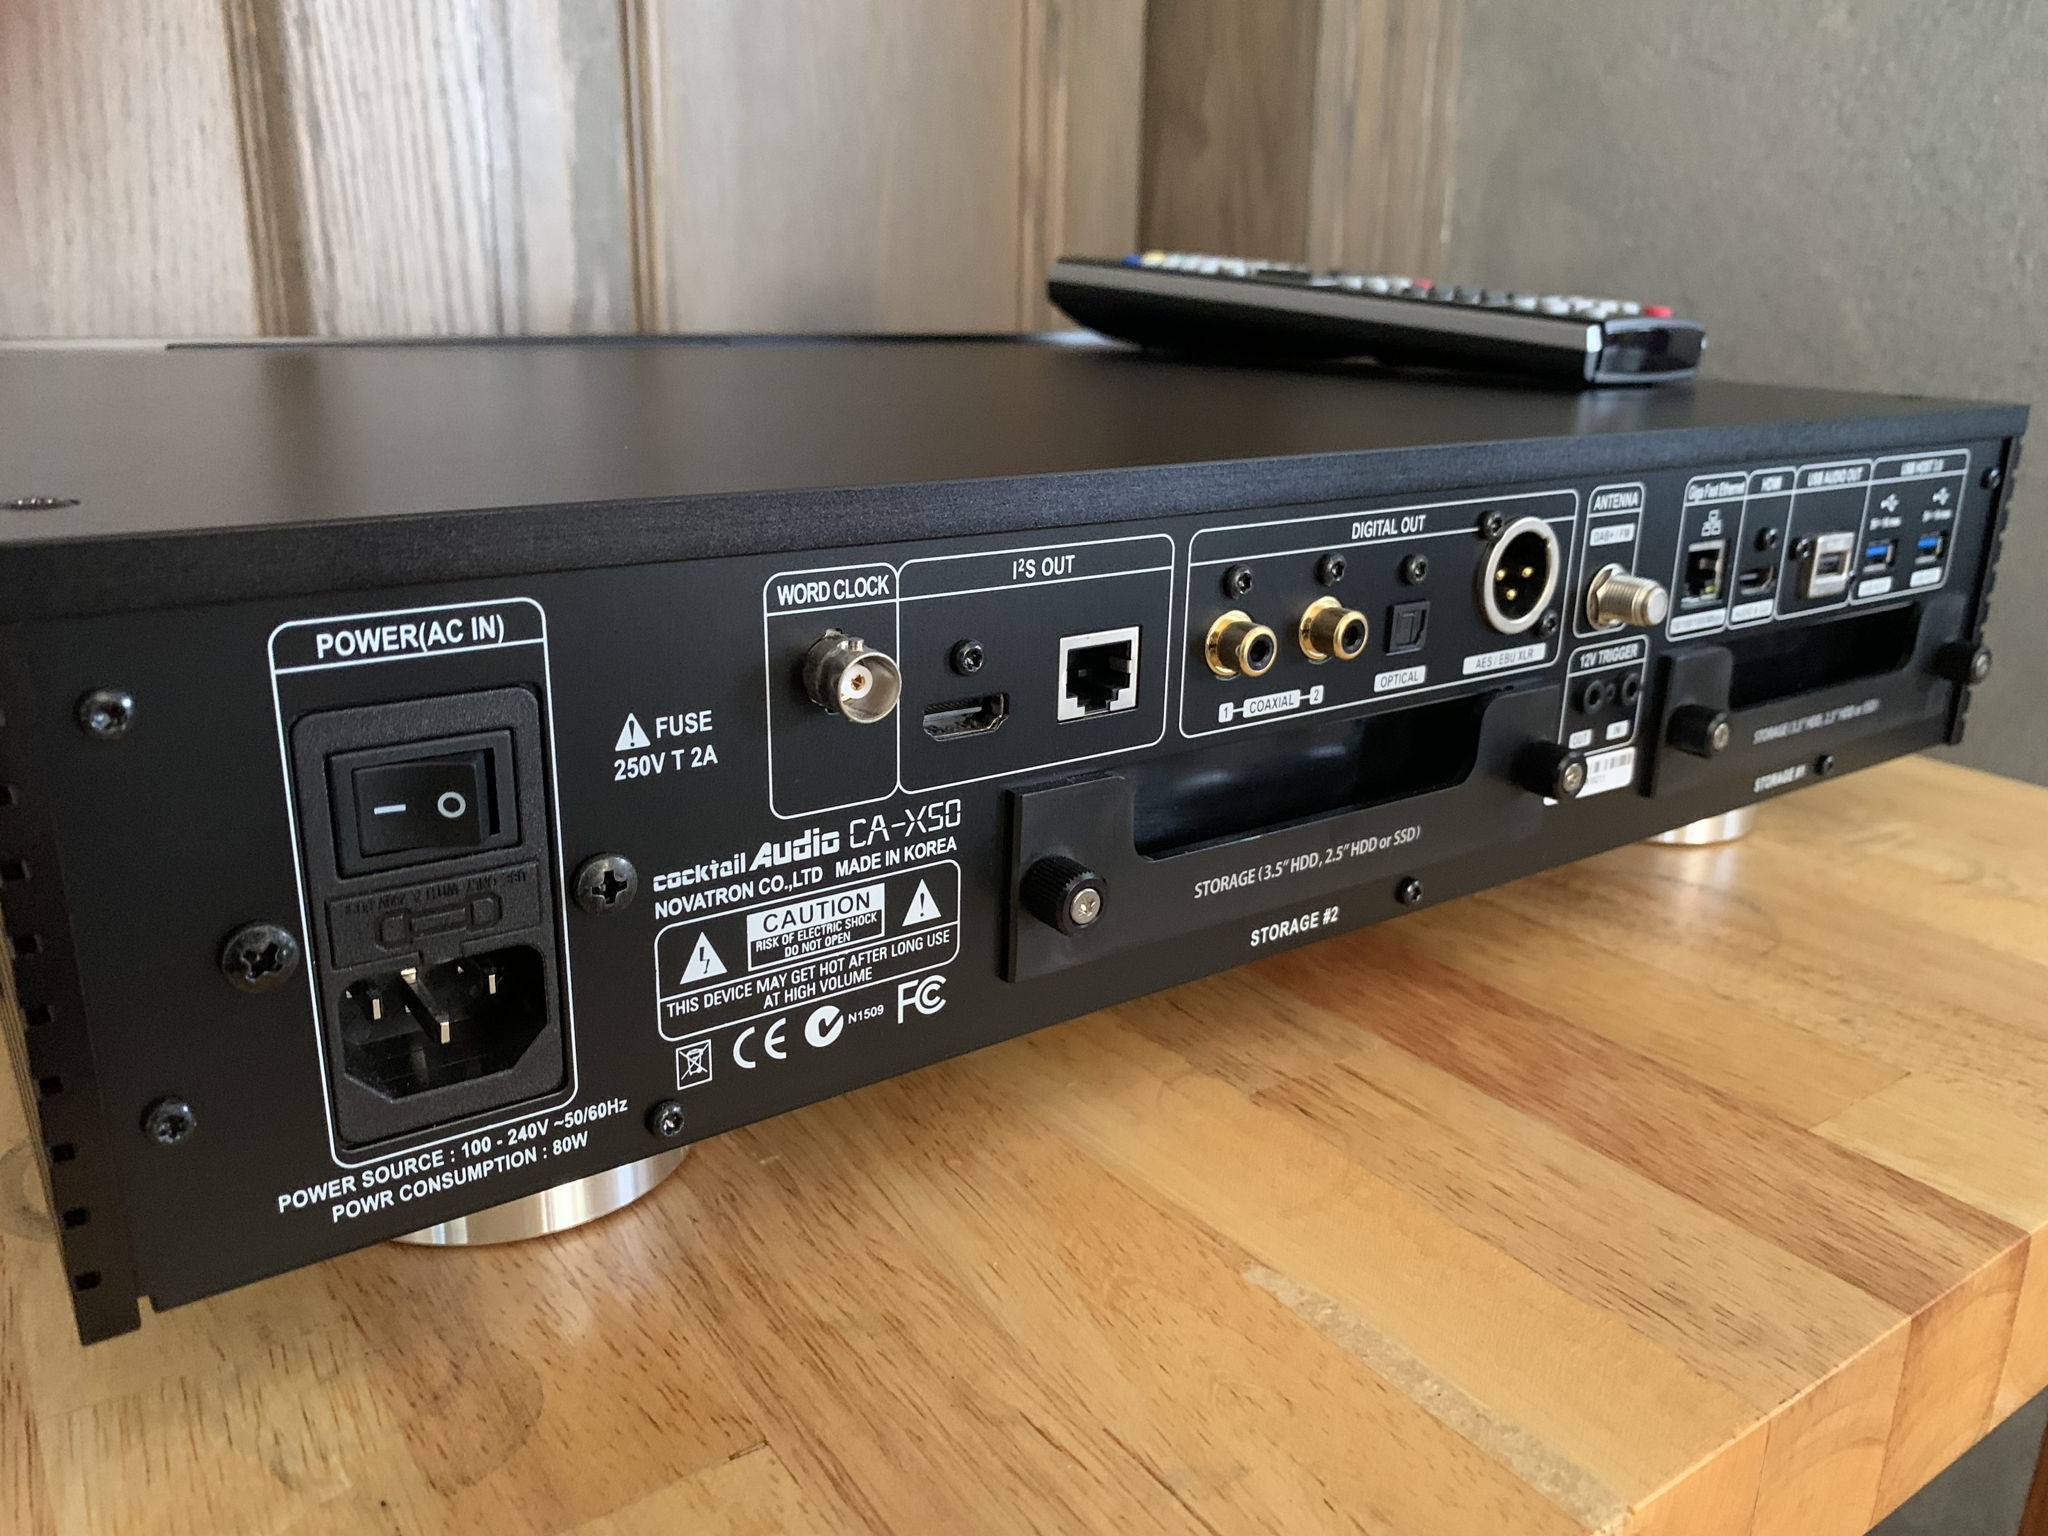 Cocktail Audio X50 Streamer/CD player/Ripper 3